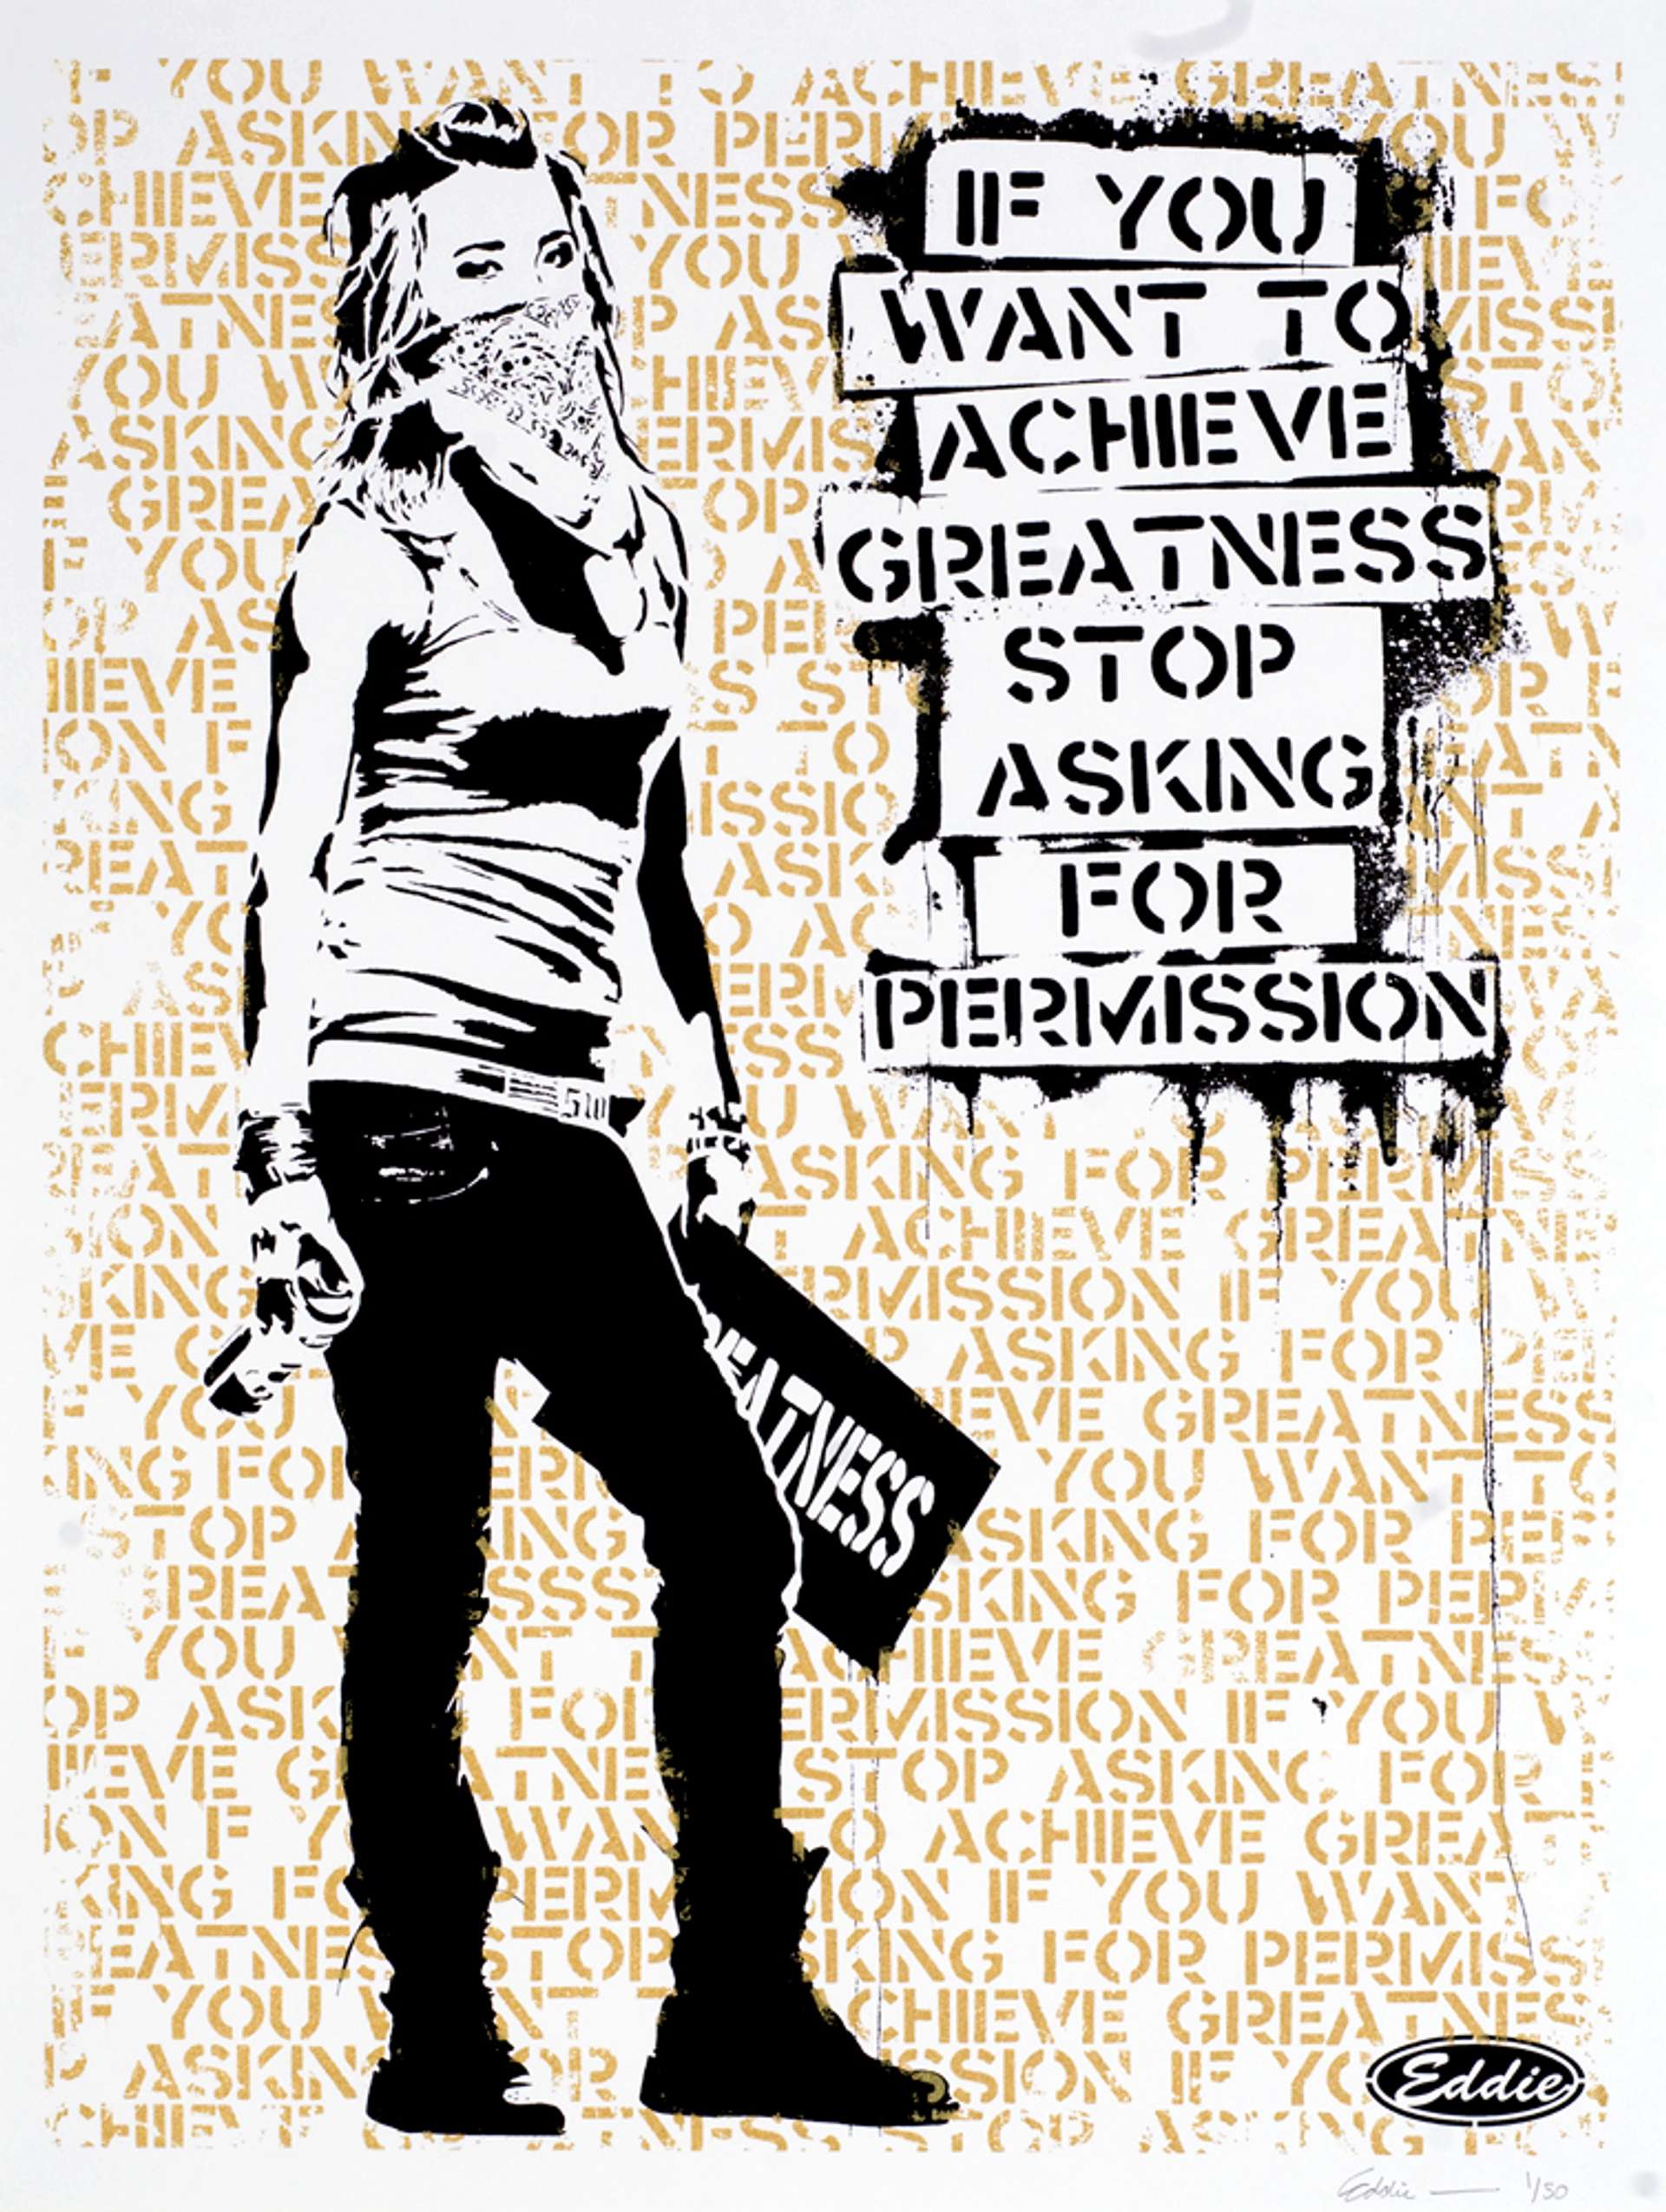 If You Want To Achieve Greatness, Stop Asking For Permission by Eddie Colla, mistaken by Walmart for a Banksy - MyArtBroker